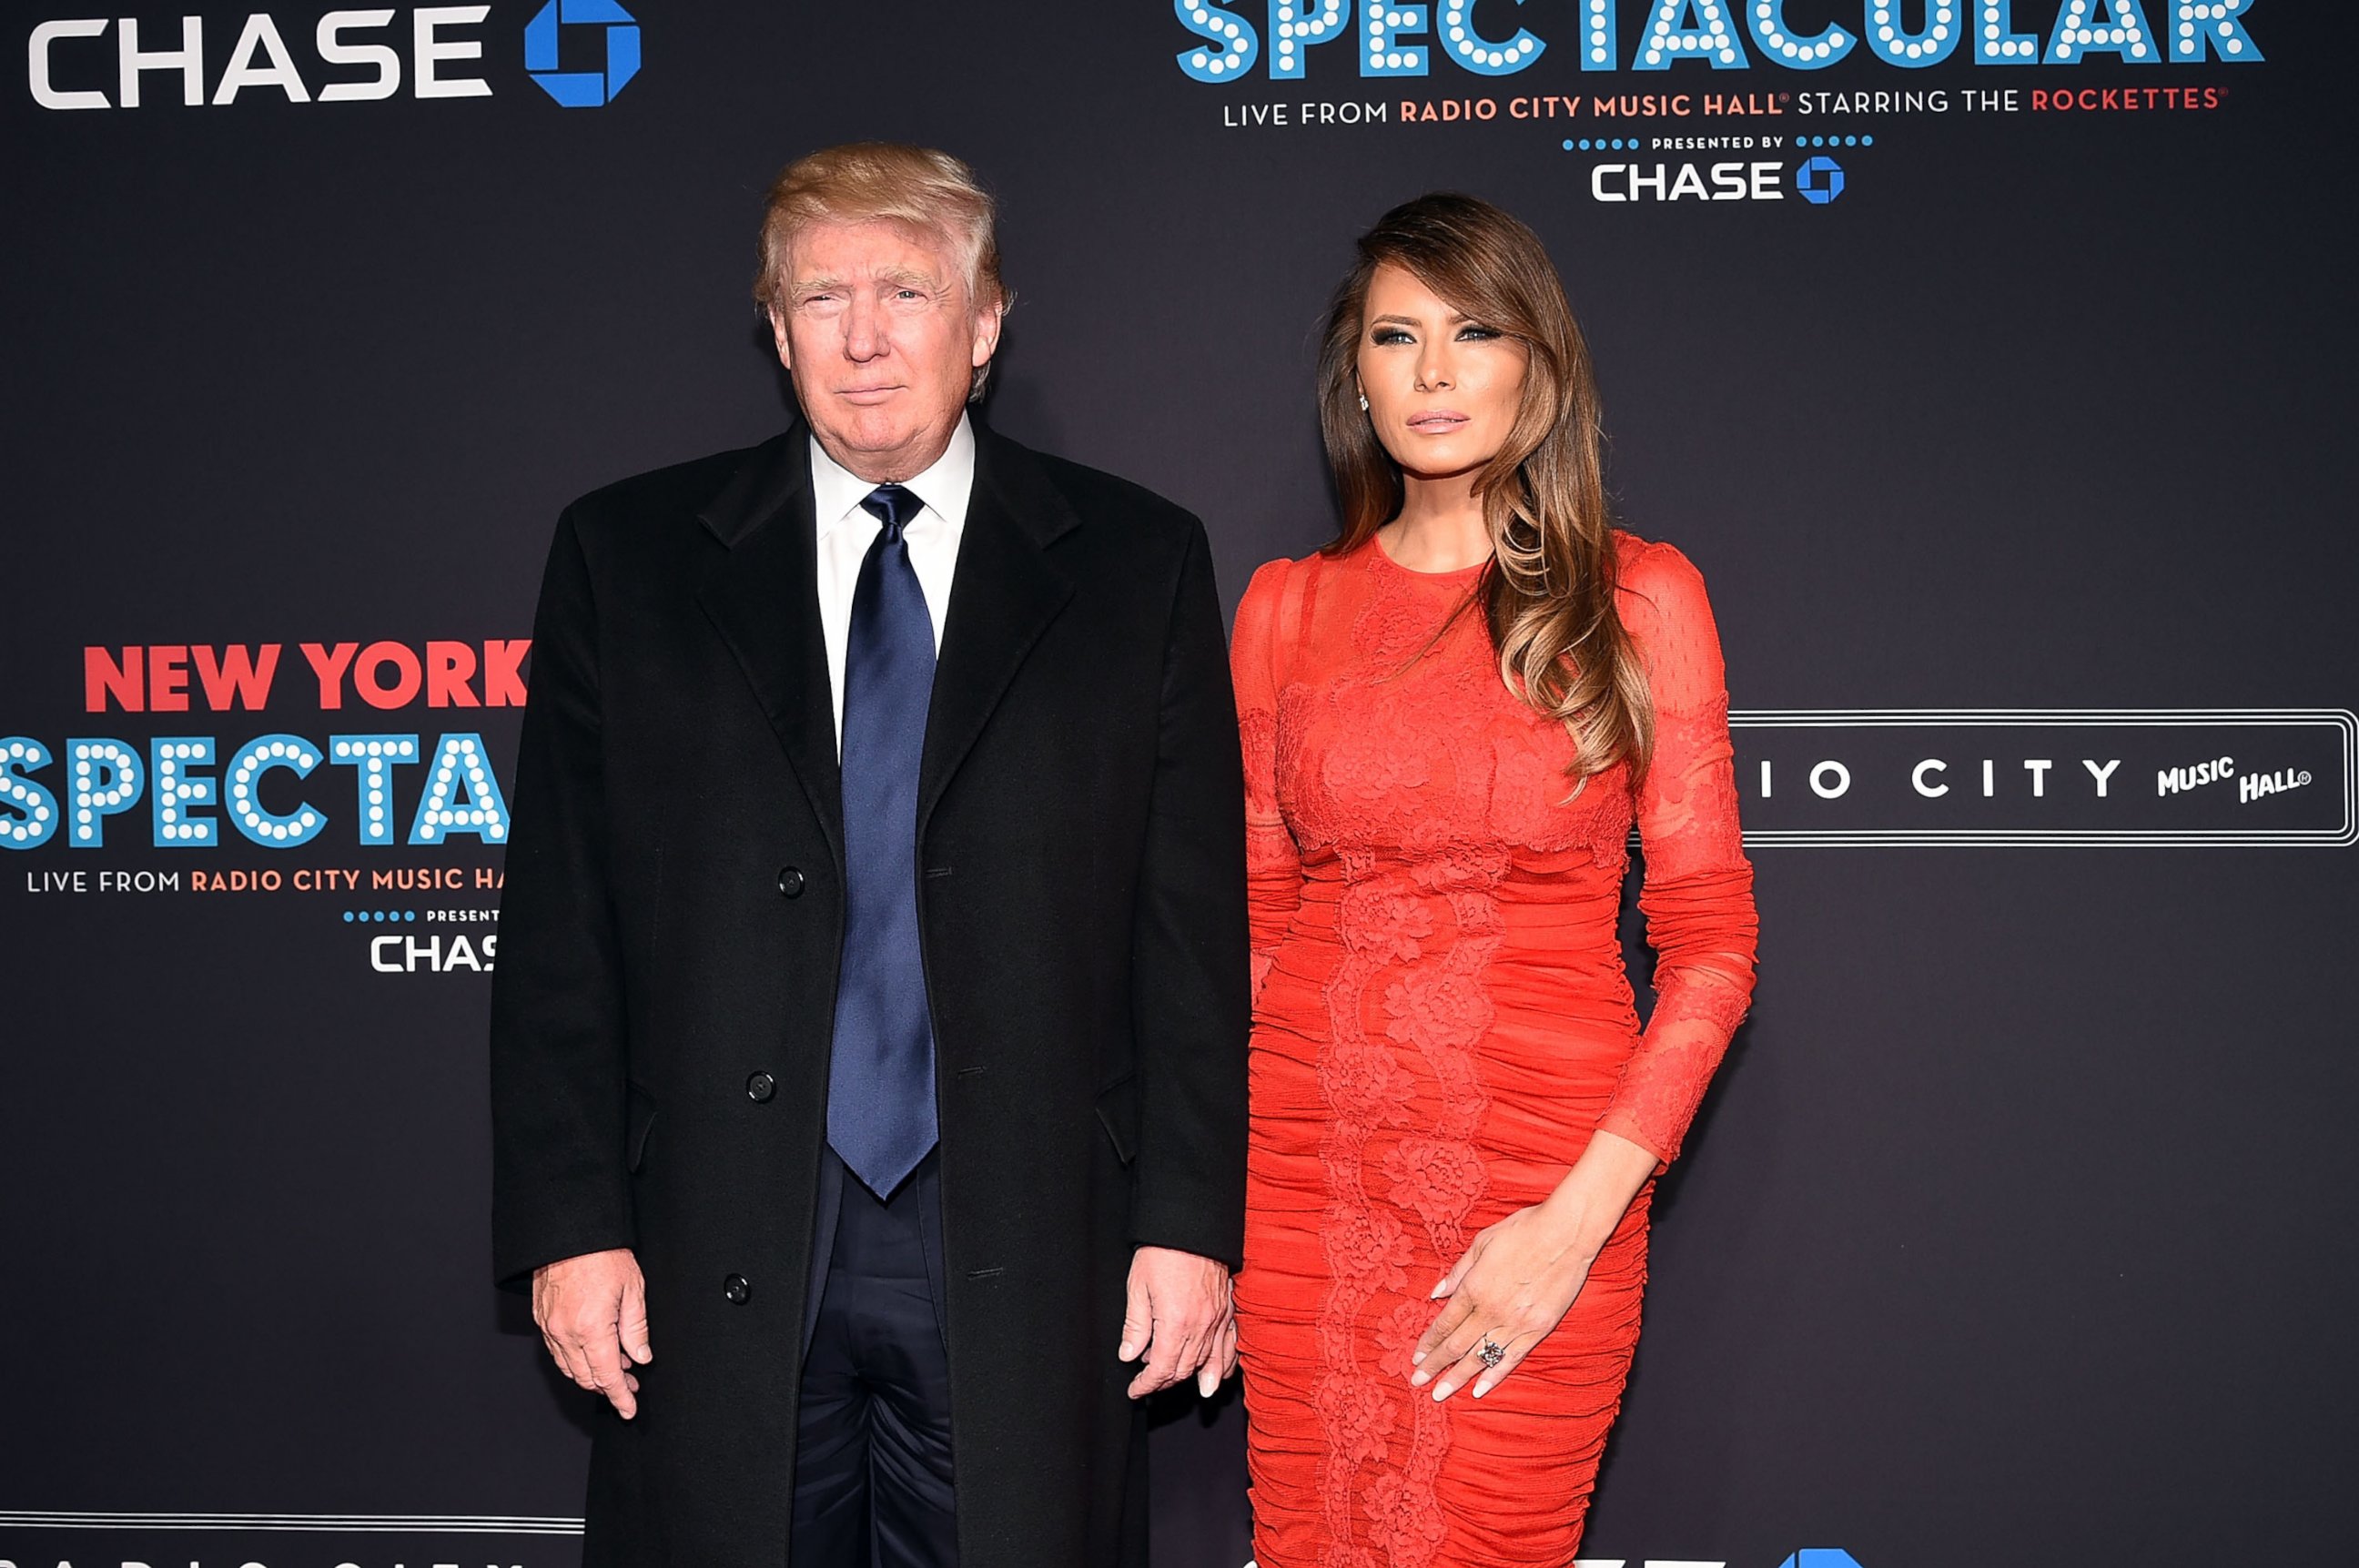 PHOTO: Donald Trump and Melania Trump attend the 2015 New York Spring Spectacular Opening Night at Radio City Music Hall on March 26, 2015 in New York.